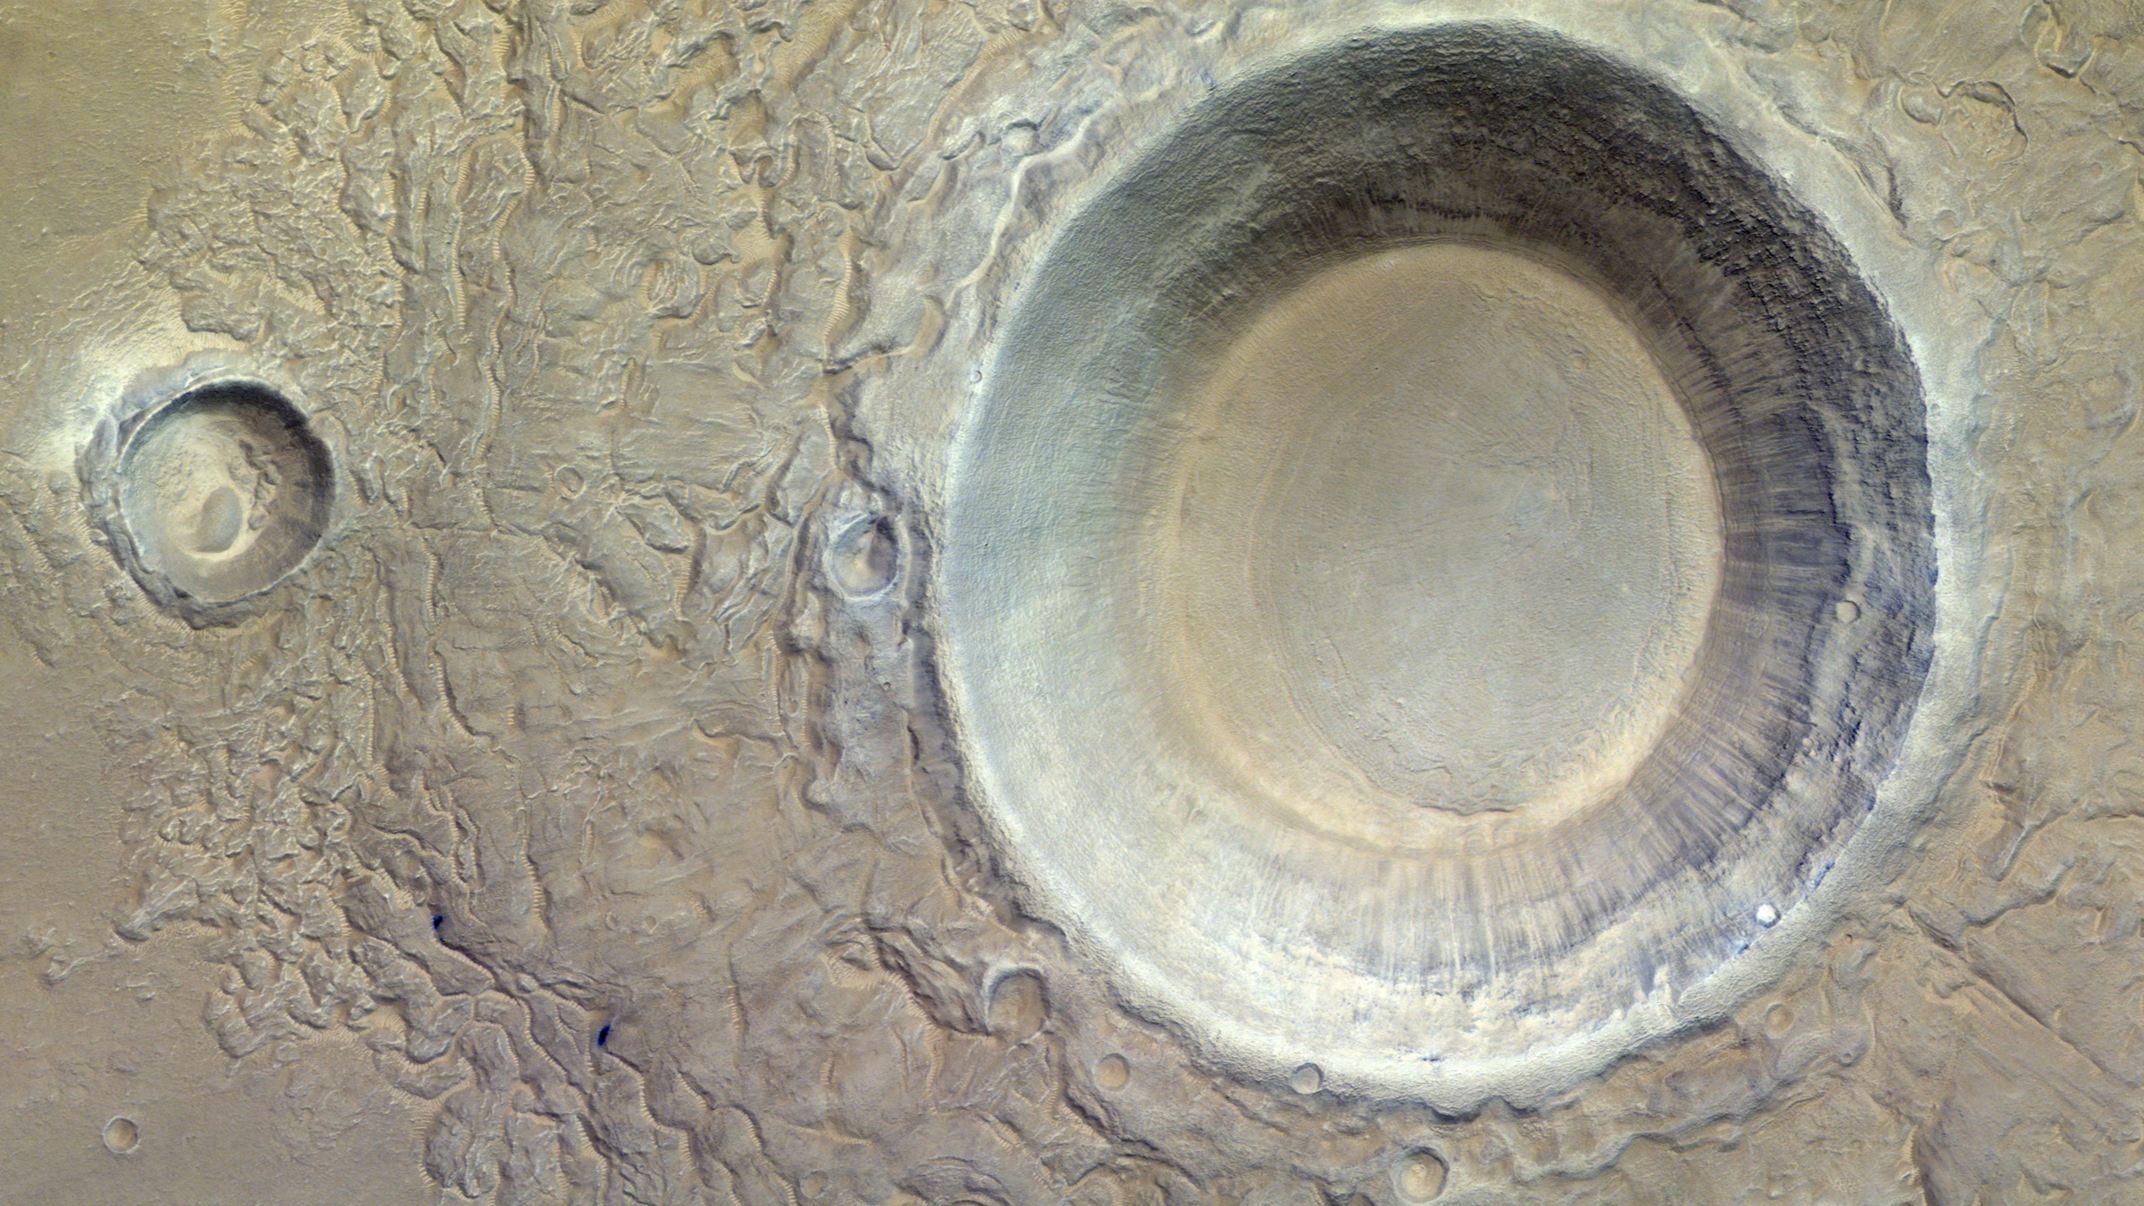 A massive, icy Mars crater stares up at a Red Planet orbiter (image)